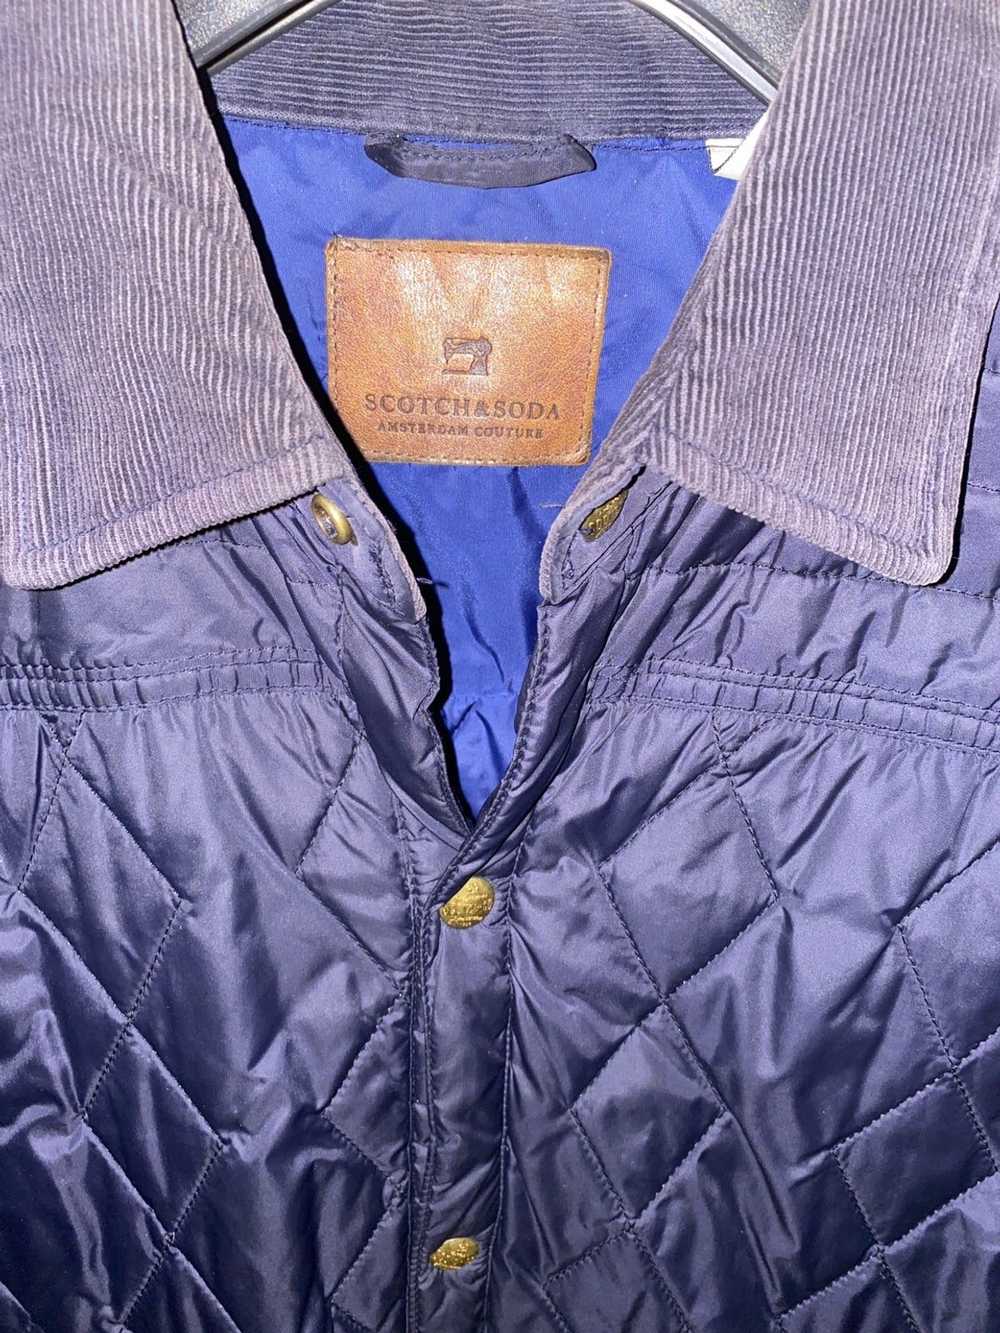 Scotch & Soda Scotch and Soda Quilted Jacket - image 2